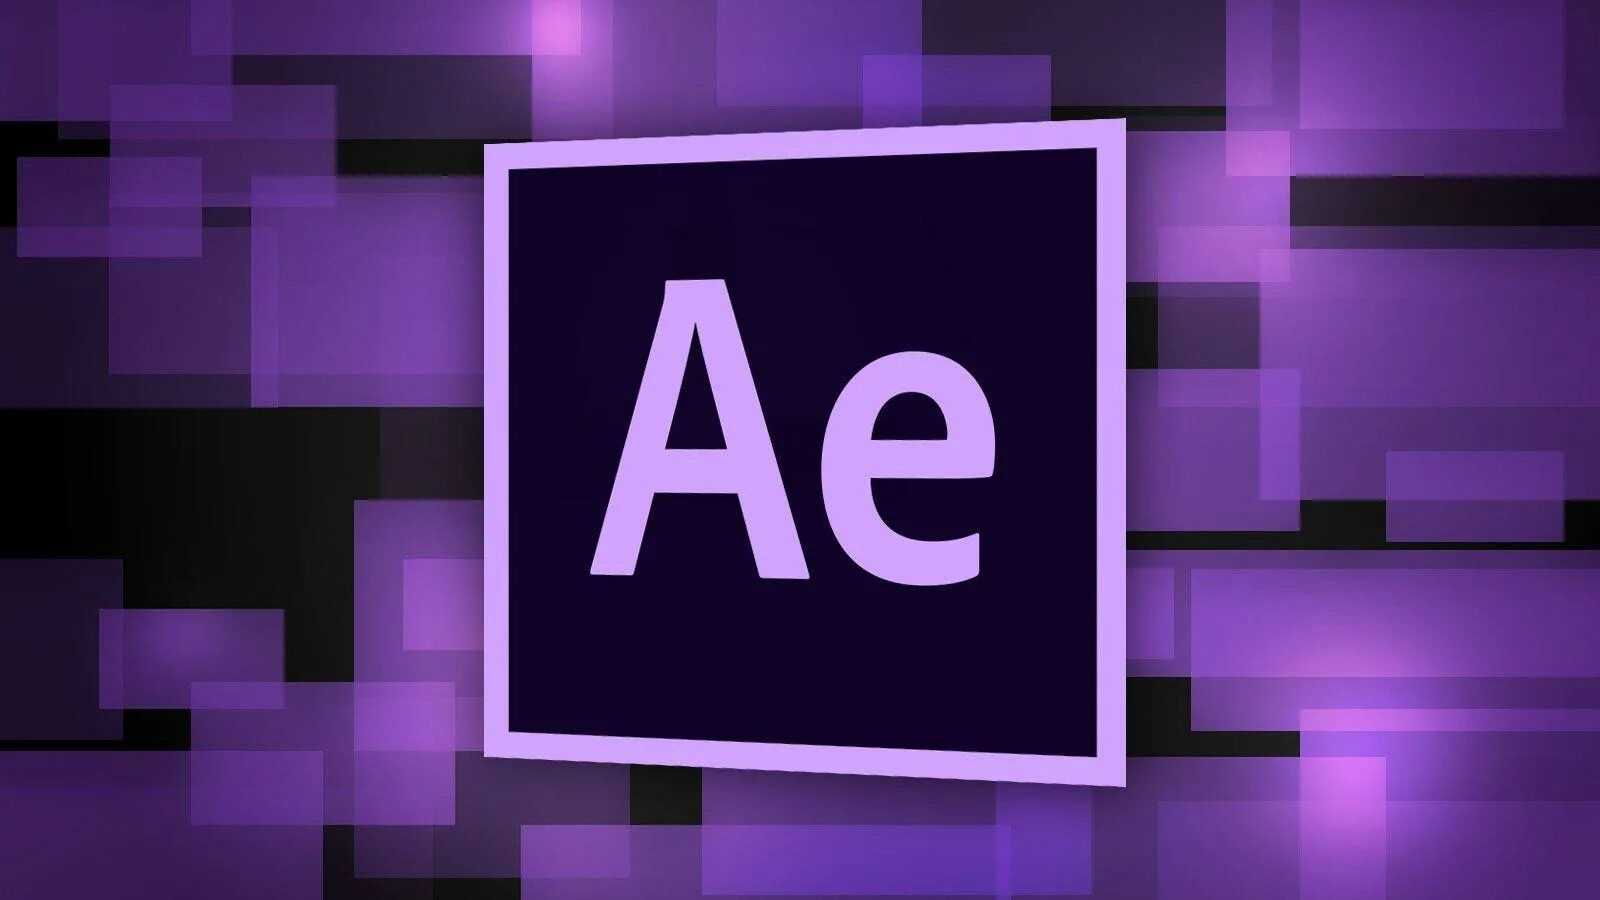 Значок Adobe after Effects. Афтер эффект. Адоб Афтер эффект. Адоб Автор эффект. Adobe effect pro